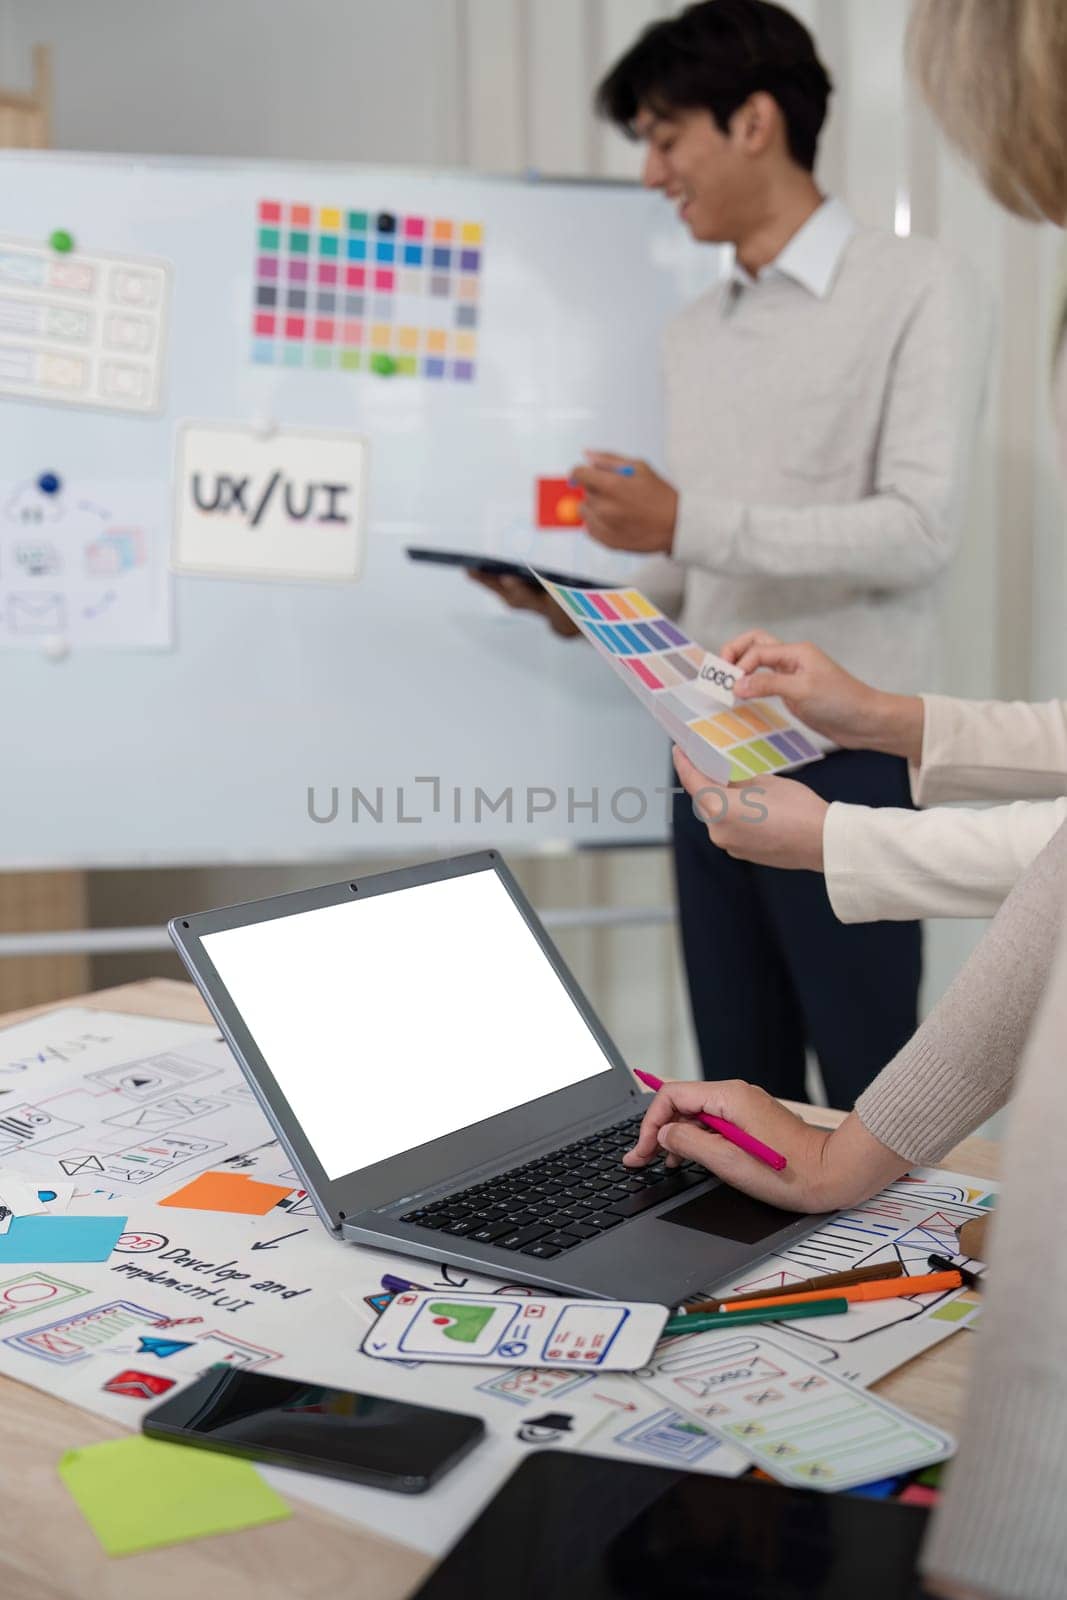 Designer team recommends color while mockup laptop display UI and UX designs for mobile app and website. Creative design and business concept.